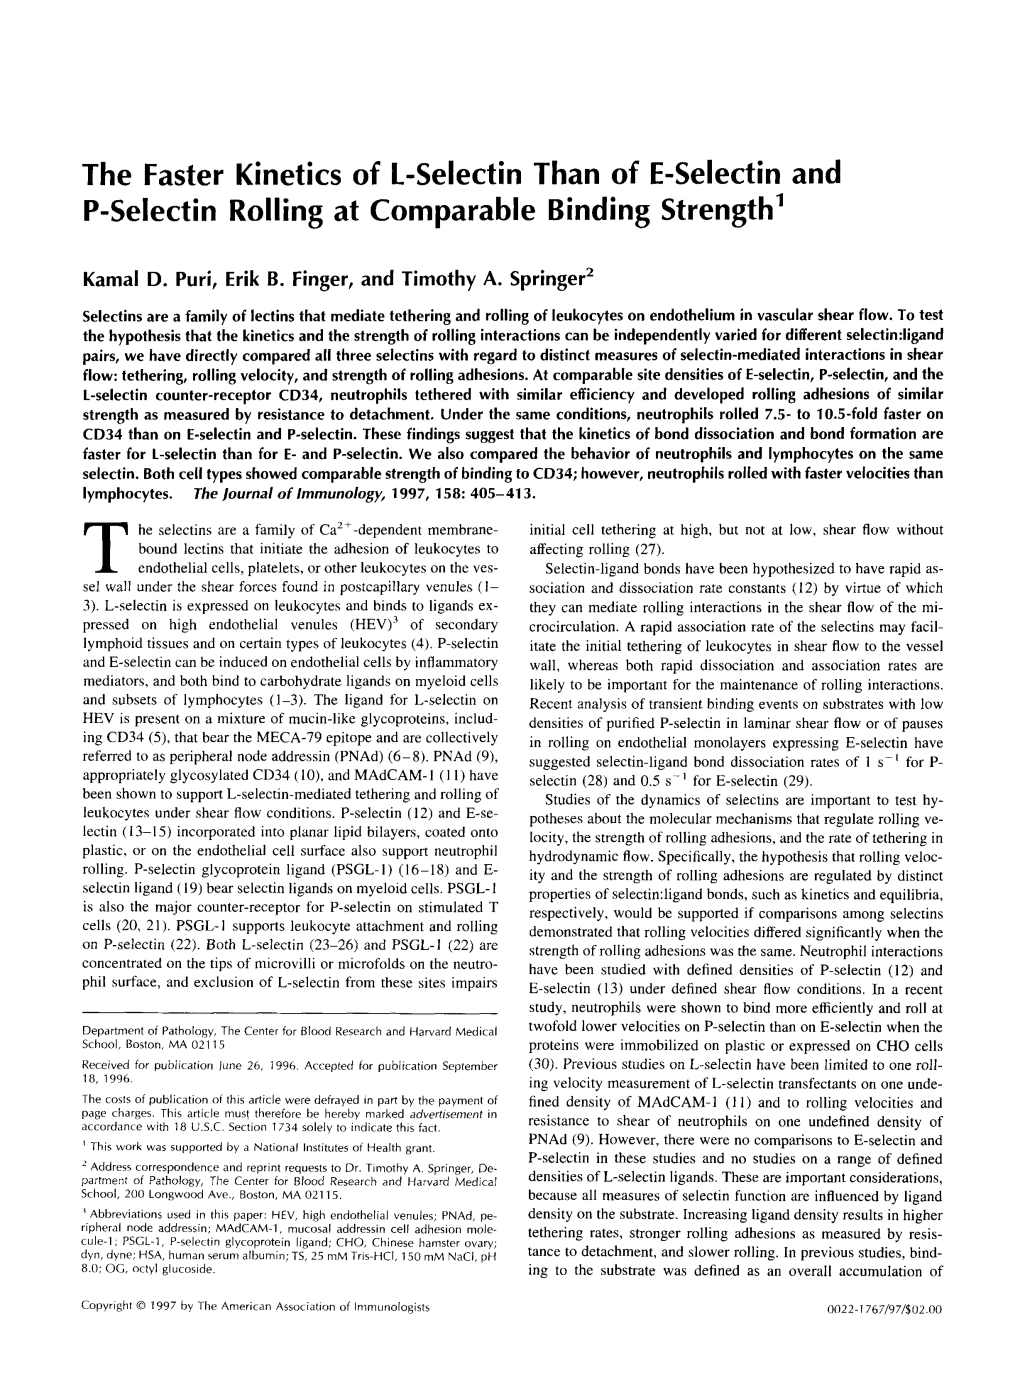 The Faster Kinetics of 1-Selectin Than of E-Selectin and P-Selectin Rolling at Comparable Binding Strength'